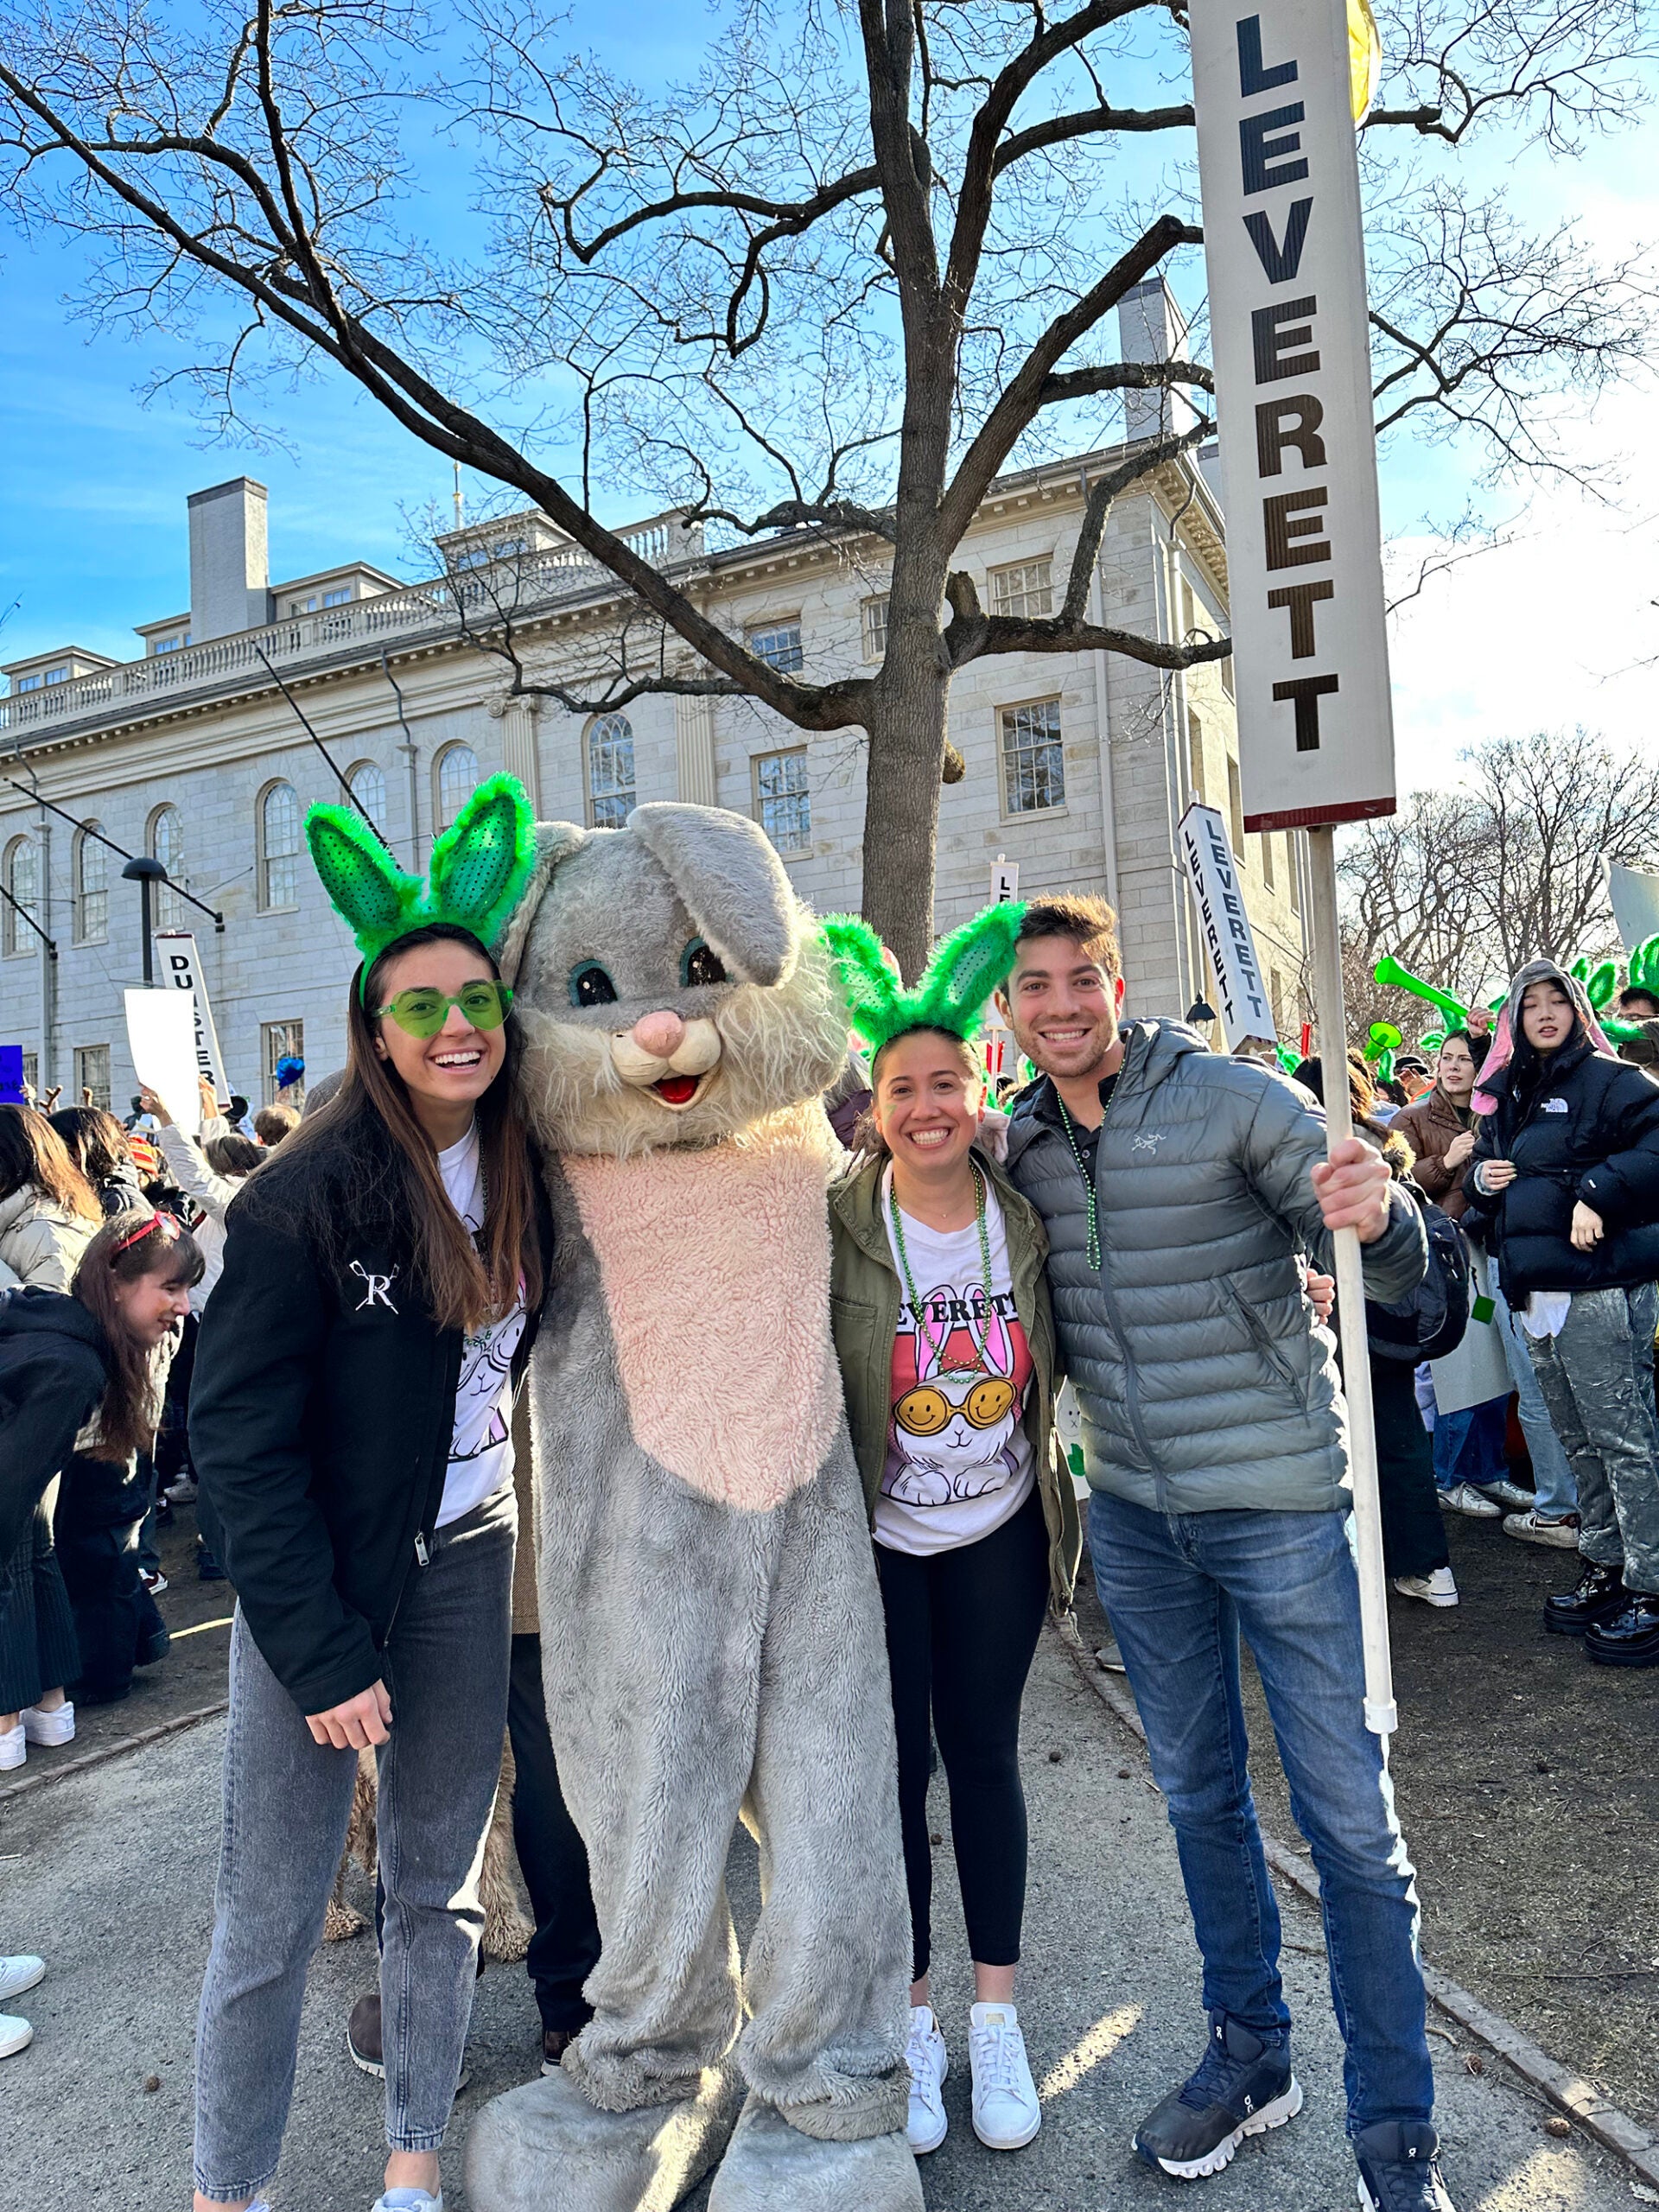 Three students stand with a student in a rabbit costume. Two students wear green bunny ears and one holds a Leverett sign